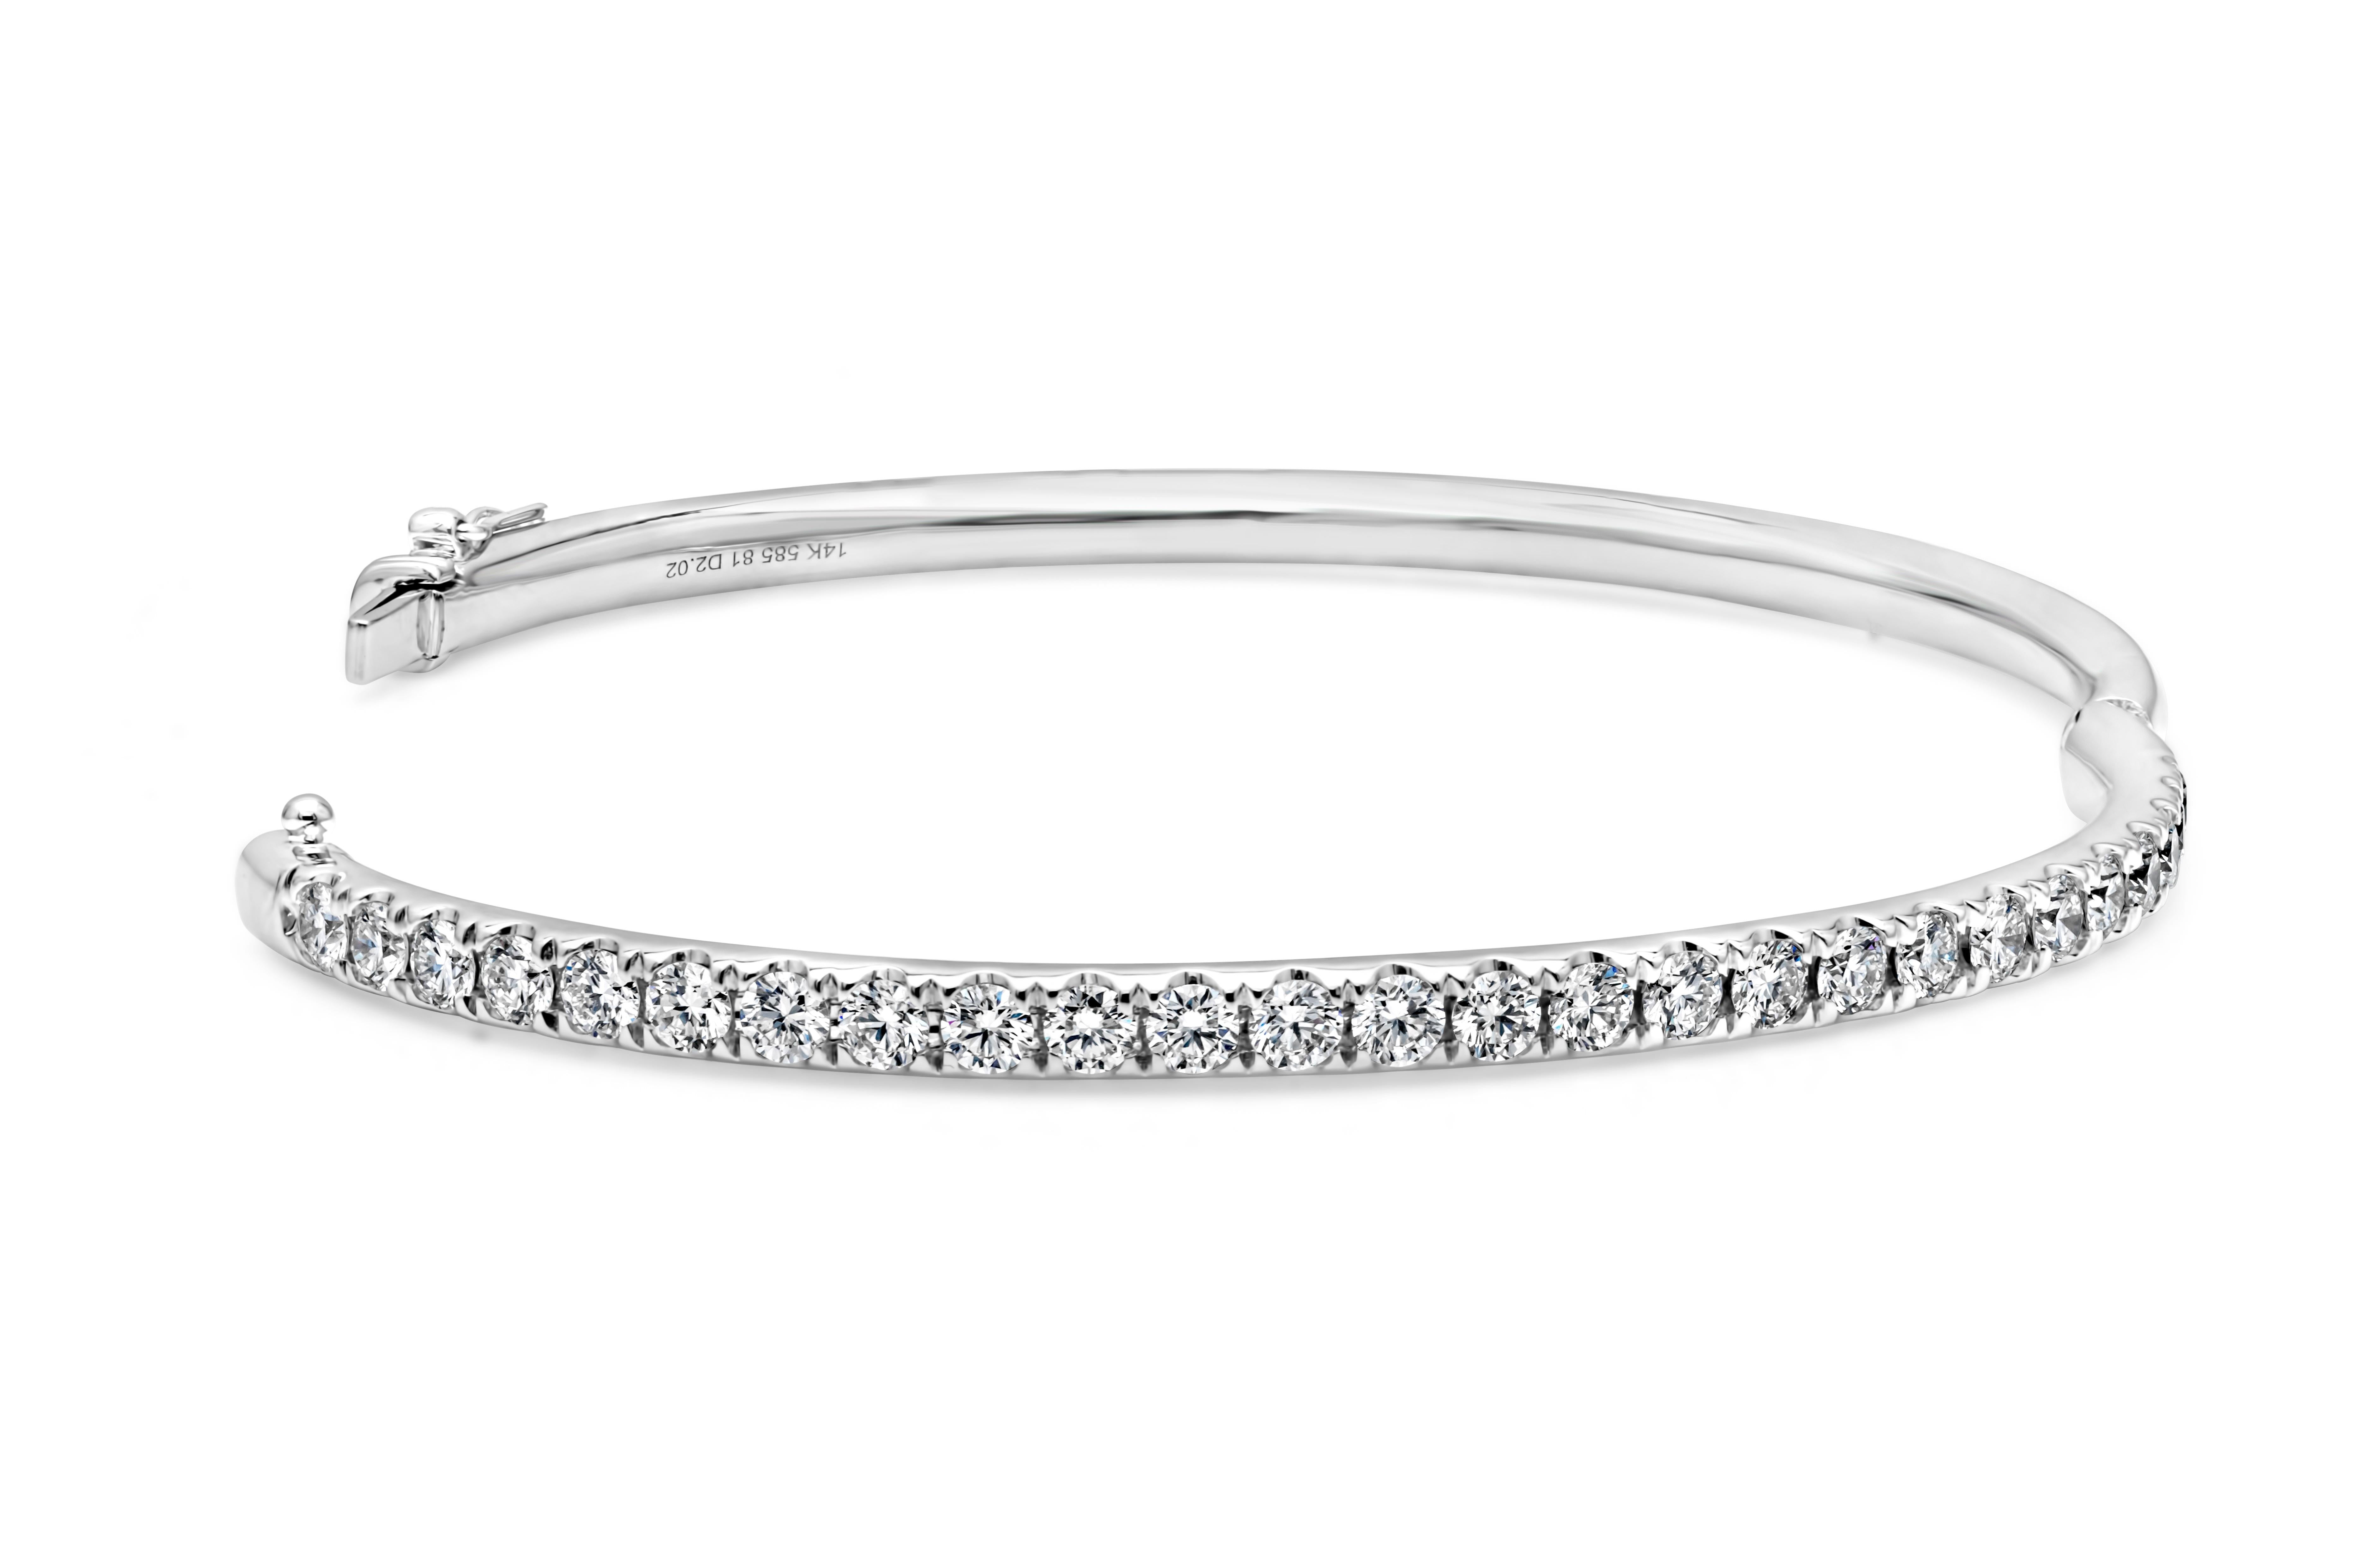 A simple and elegant small wrist bangle bracelet, featuring 26 round brilliant cut diamonds weighing 2.02 carats total with F color and VS-SI1 clarity. Finely set on 14K white gold, with a clasp for secure wear. This bracelet is 6.88 inches in